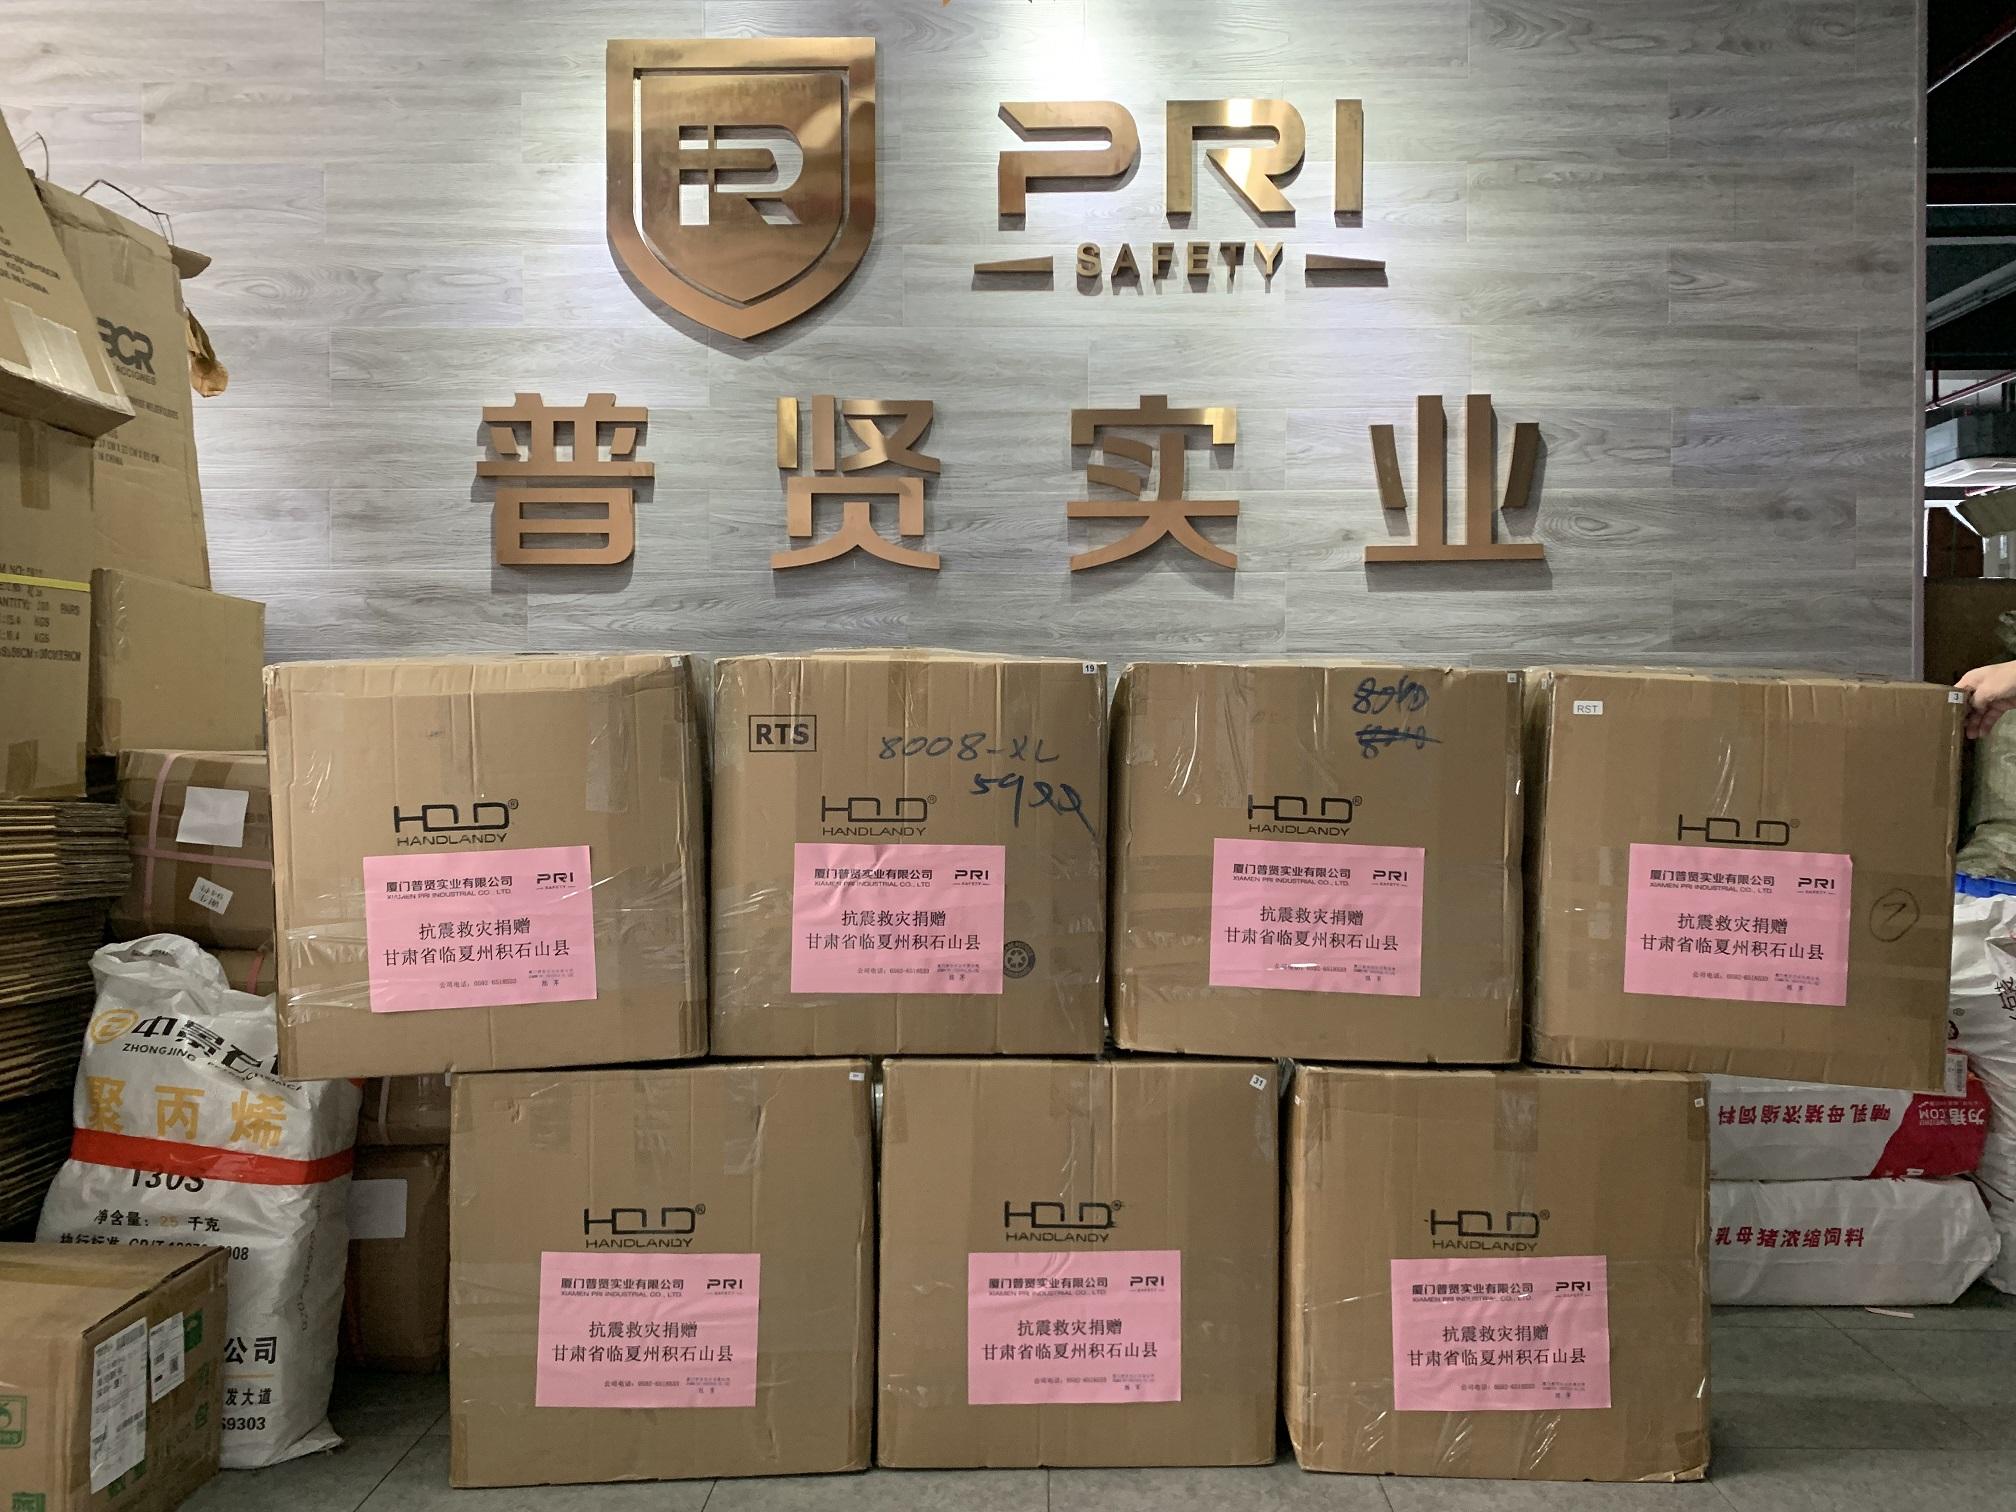 PRISAFETY Extends Warmth and Support to Earthquake-Affected Region in Gansu, China